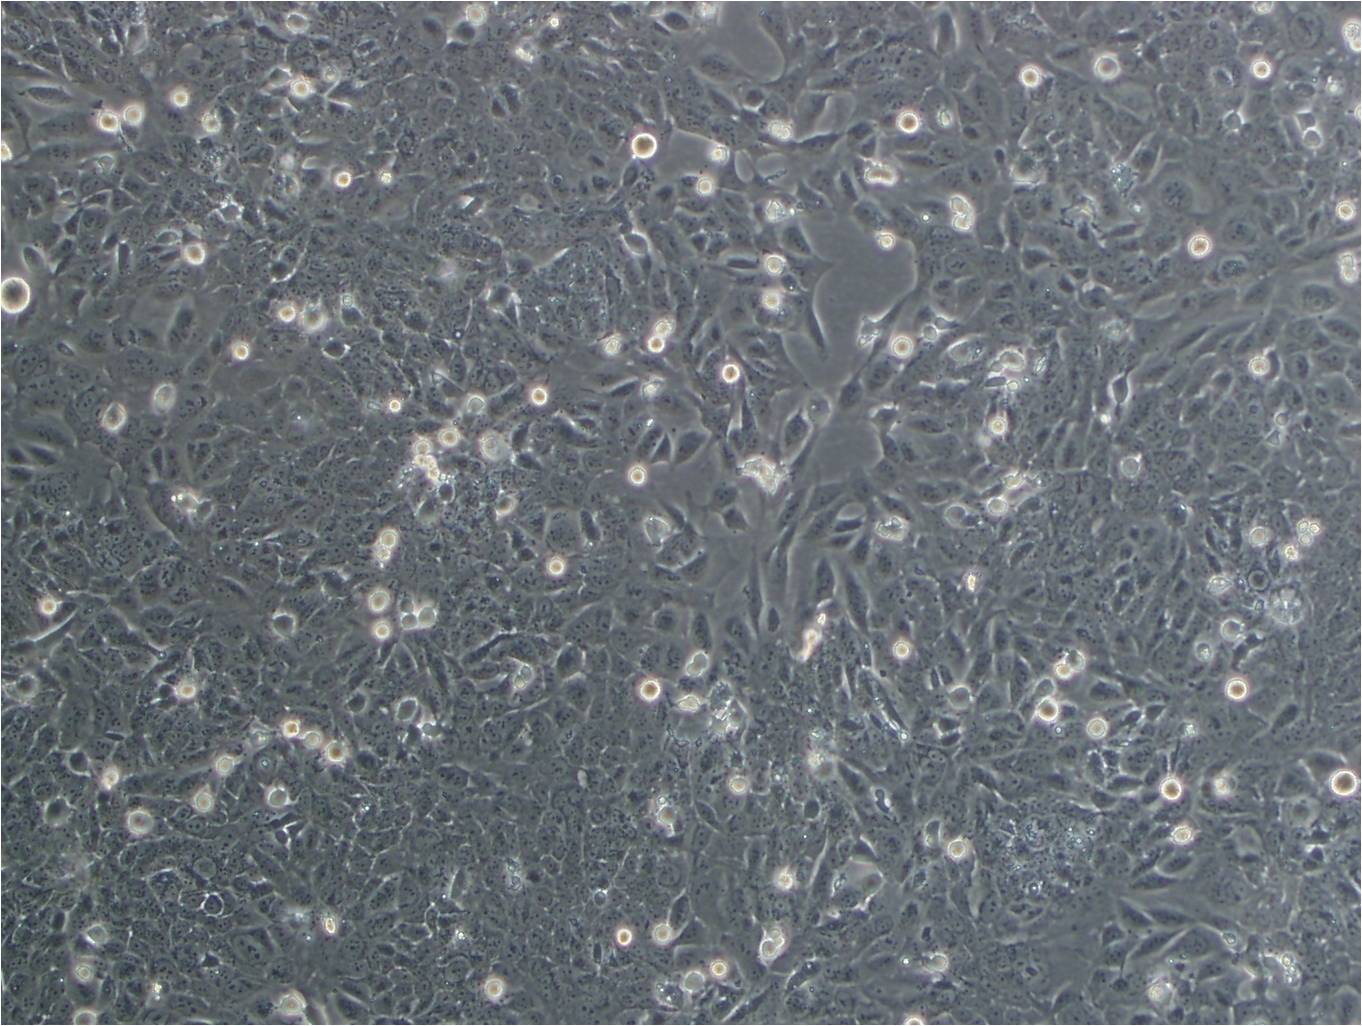 T98G epithelioid cells人多形性恶性胶质瘤细胞系,T98G epithelioid cells